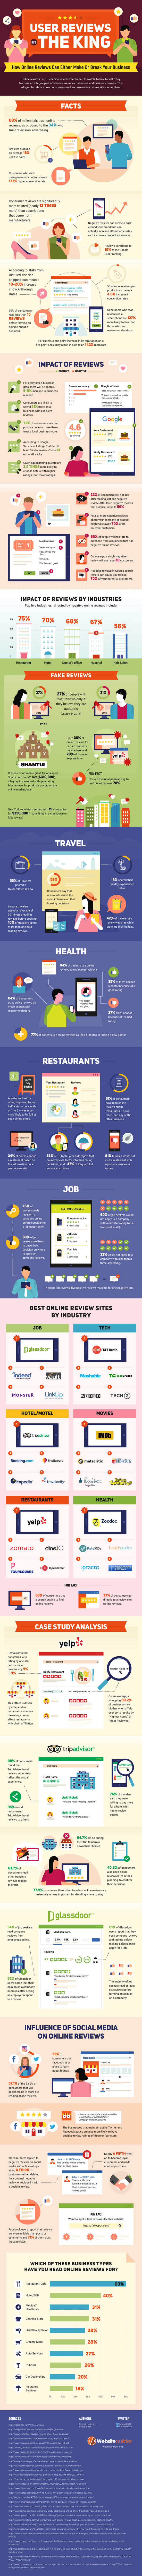 Customer Online Reviews Infographic